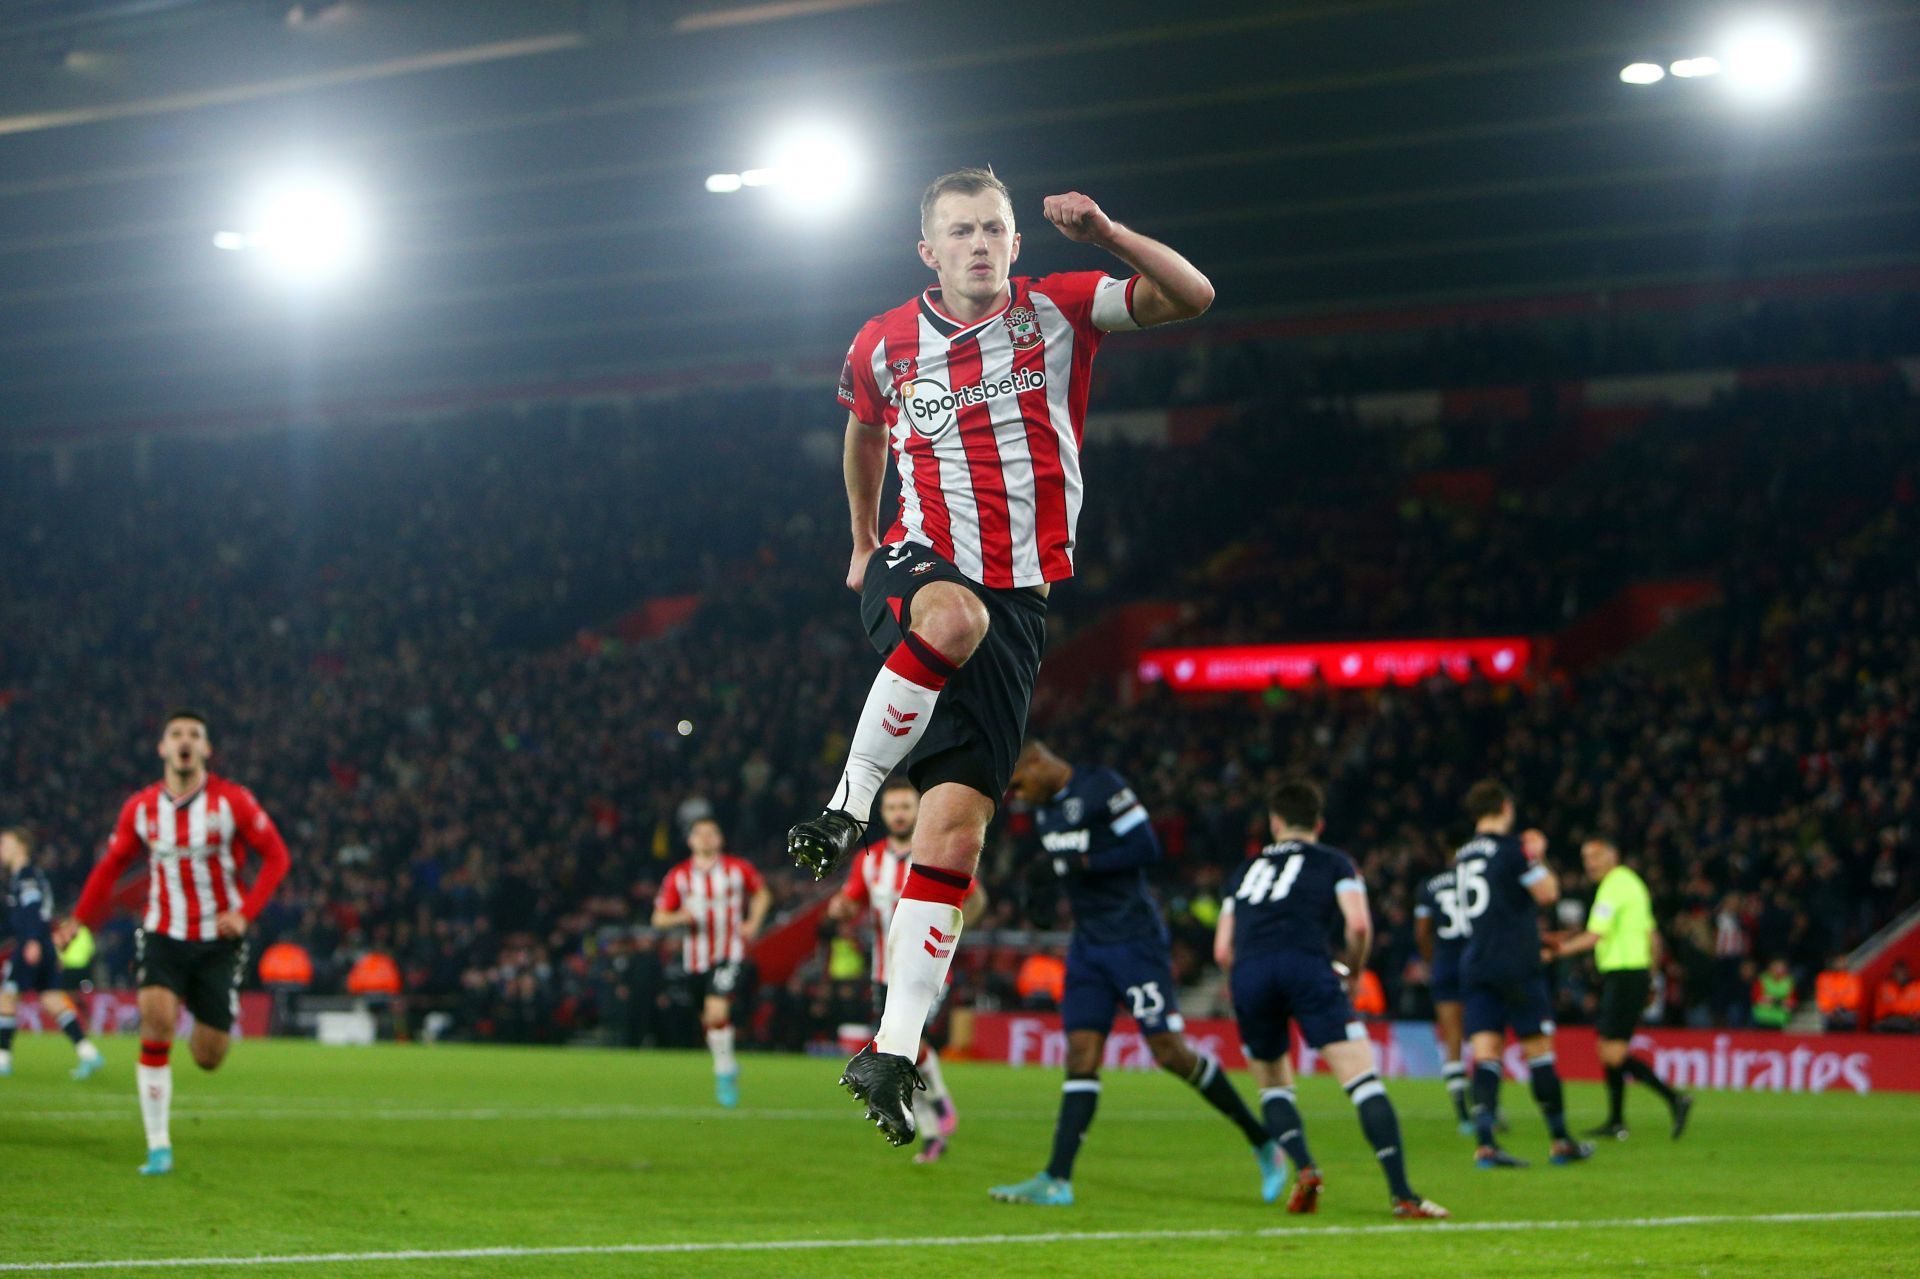 James Ward-Prowse: The Emirates FA Cup Fifth Round